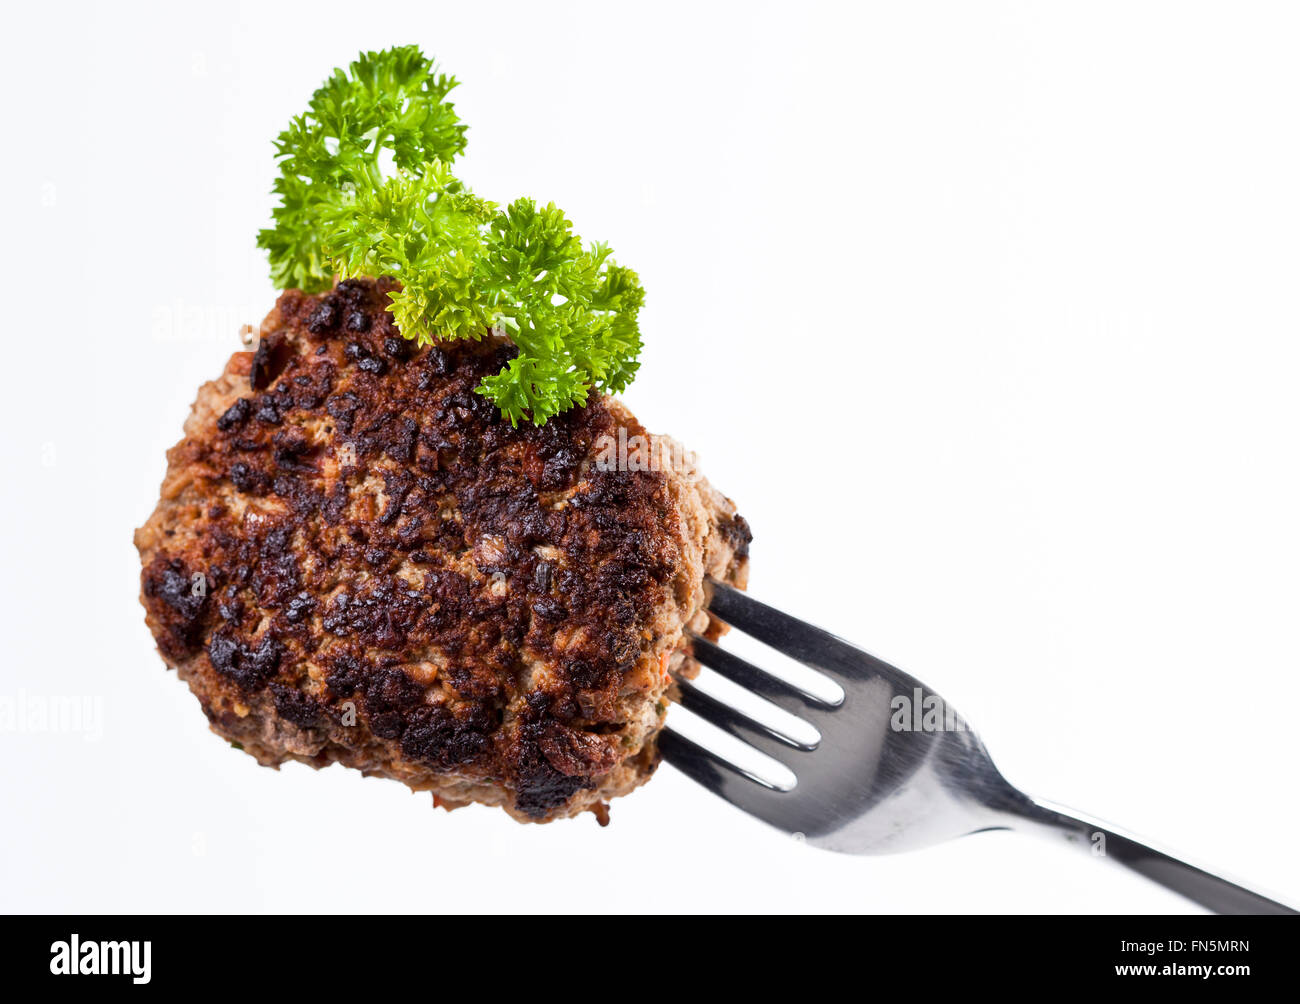 The picture shows a meatball on a fork Stock Photo